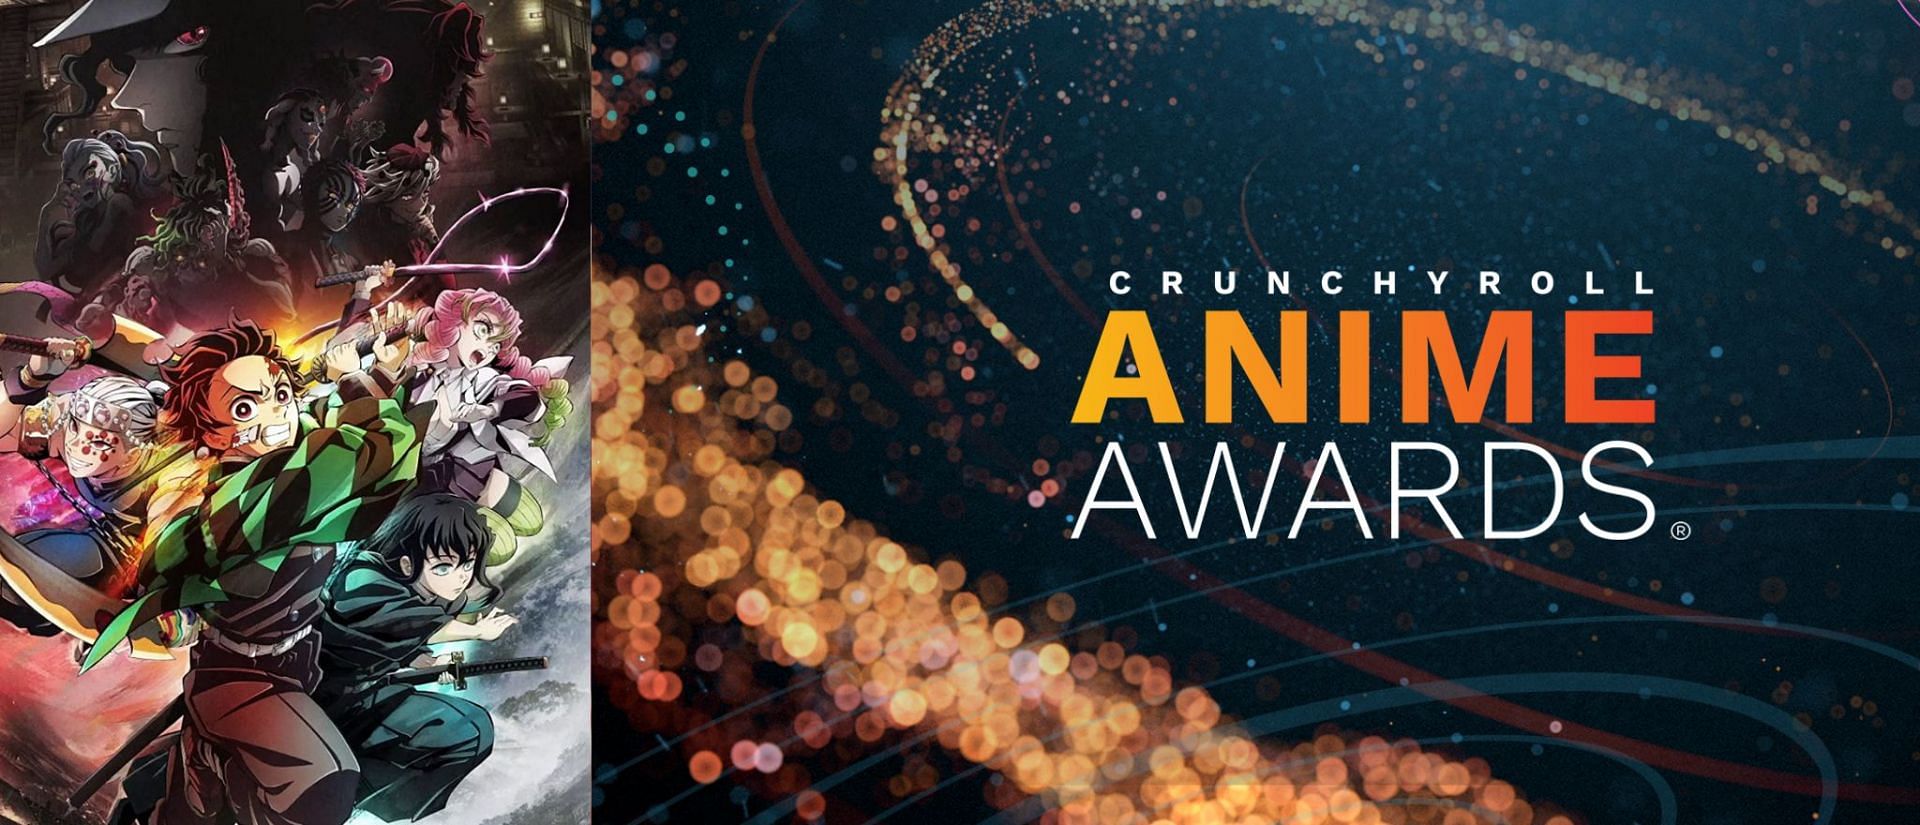 Crunchyroll  Meet the Nominees of This Years Anime Awards